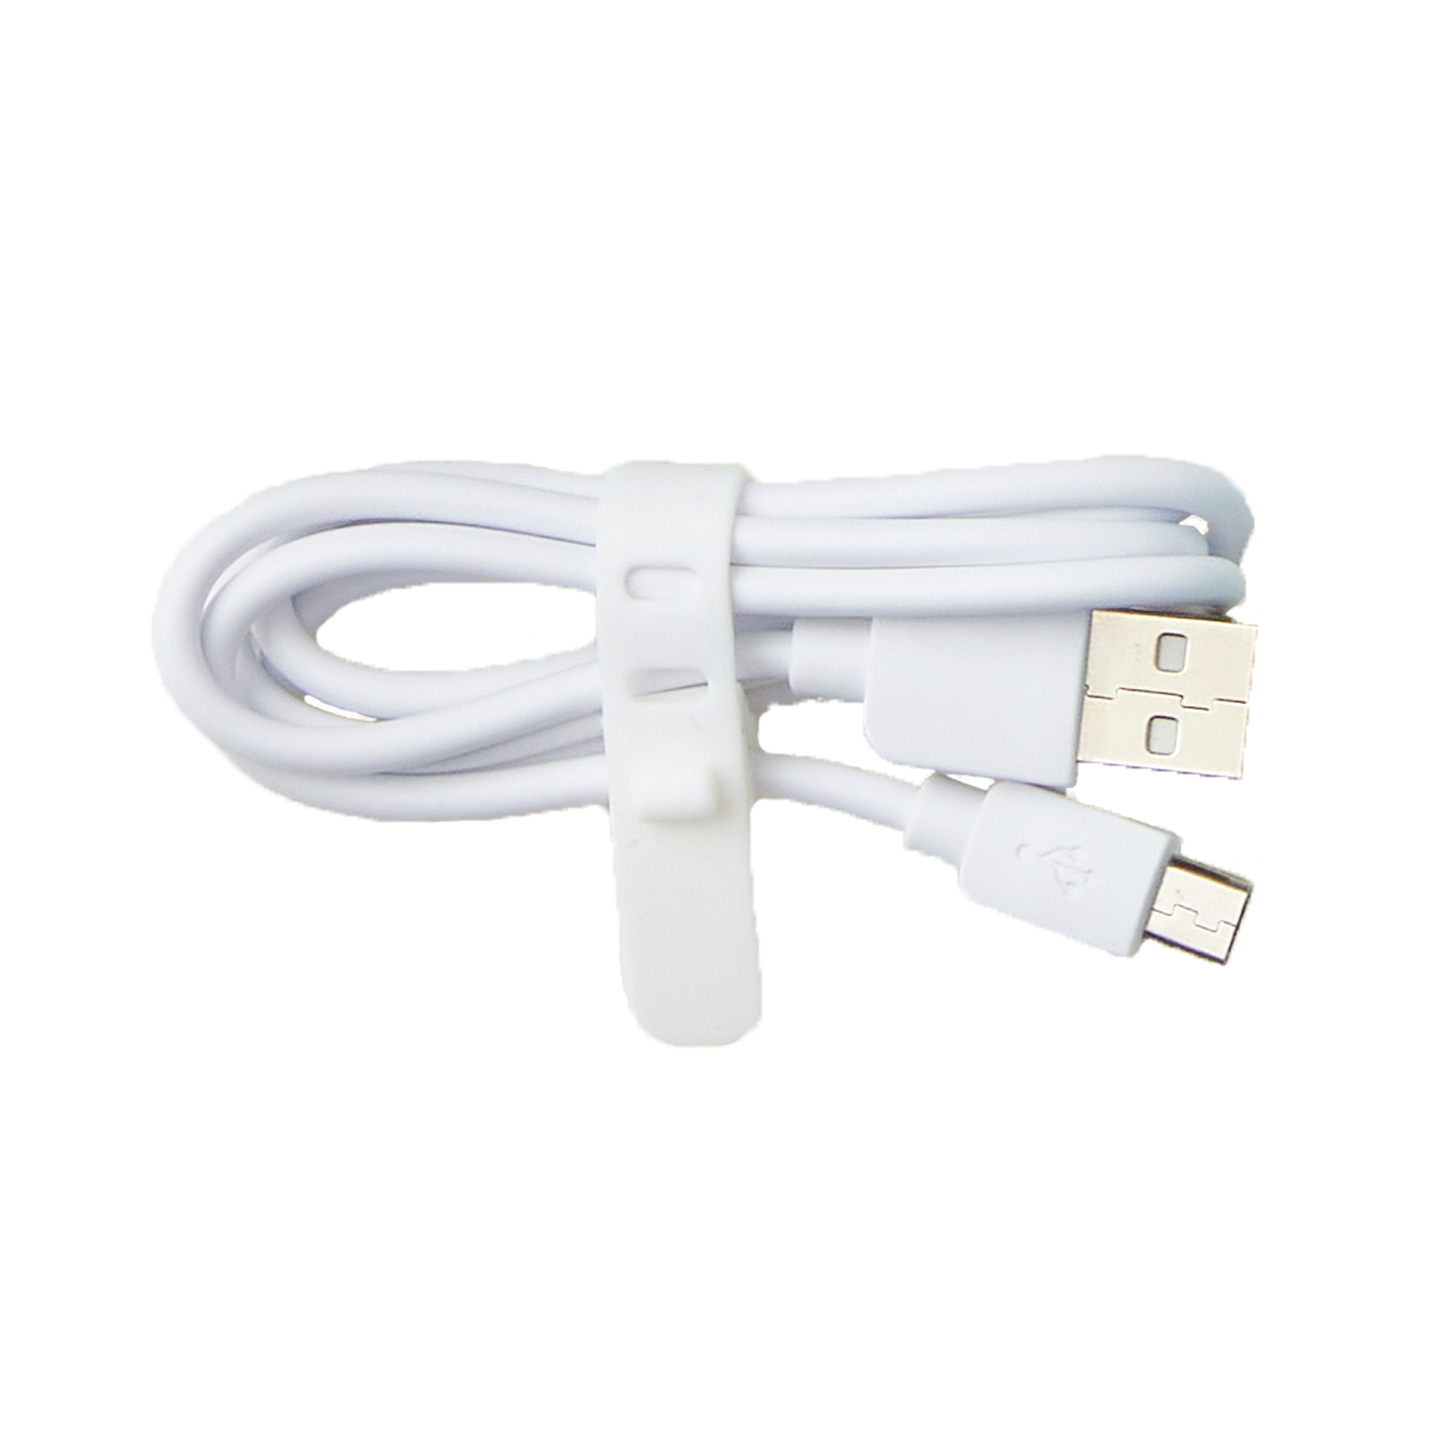 Personal Microderm Elite Pro Charging Cord